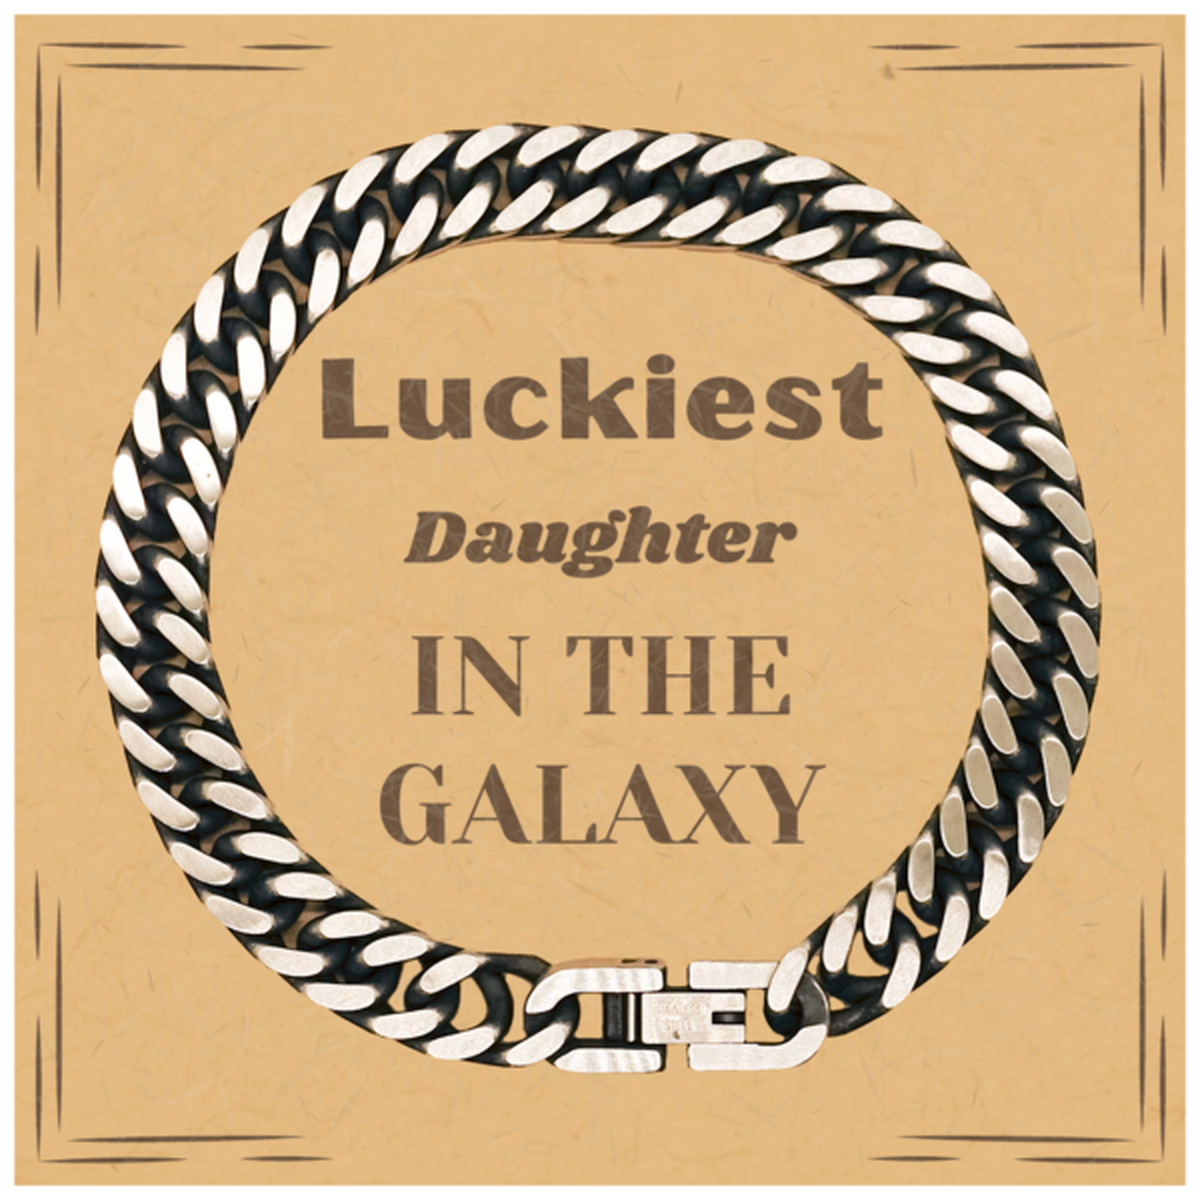 Luckiest Daughter in the Galaxy, To My Daughter Message Card Gifts, Christmas Daughter Cuban Link Chain Bracelet Gifts, X-mas Birthday Unique Gifts For Daughter Men Women